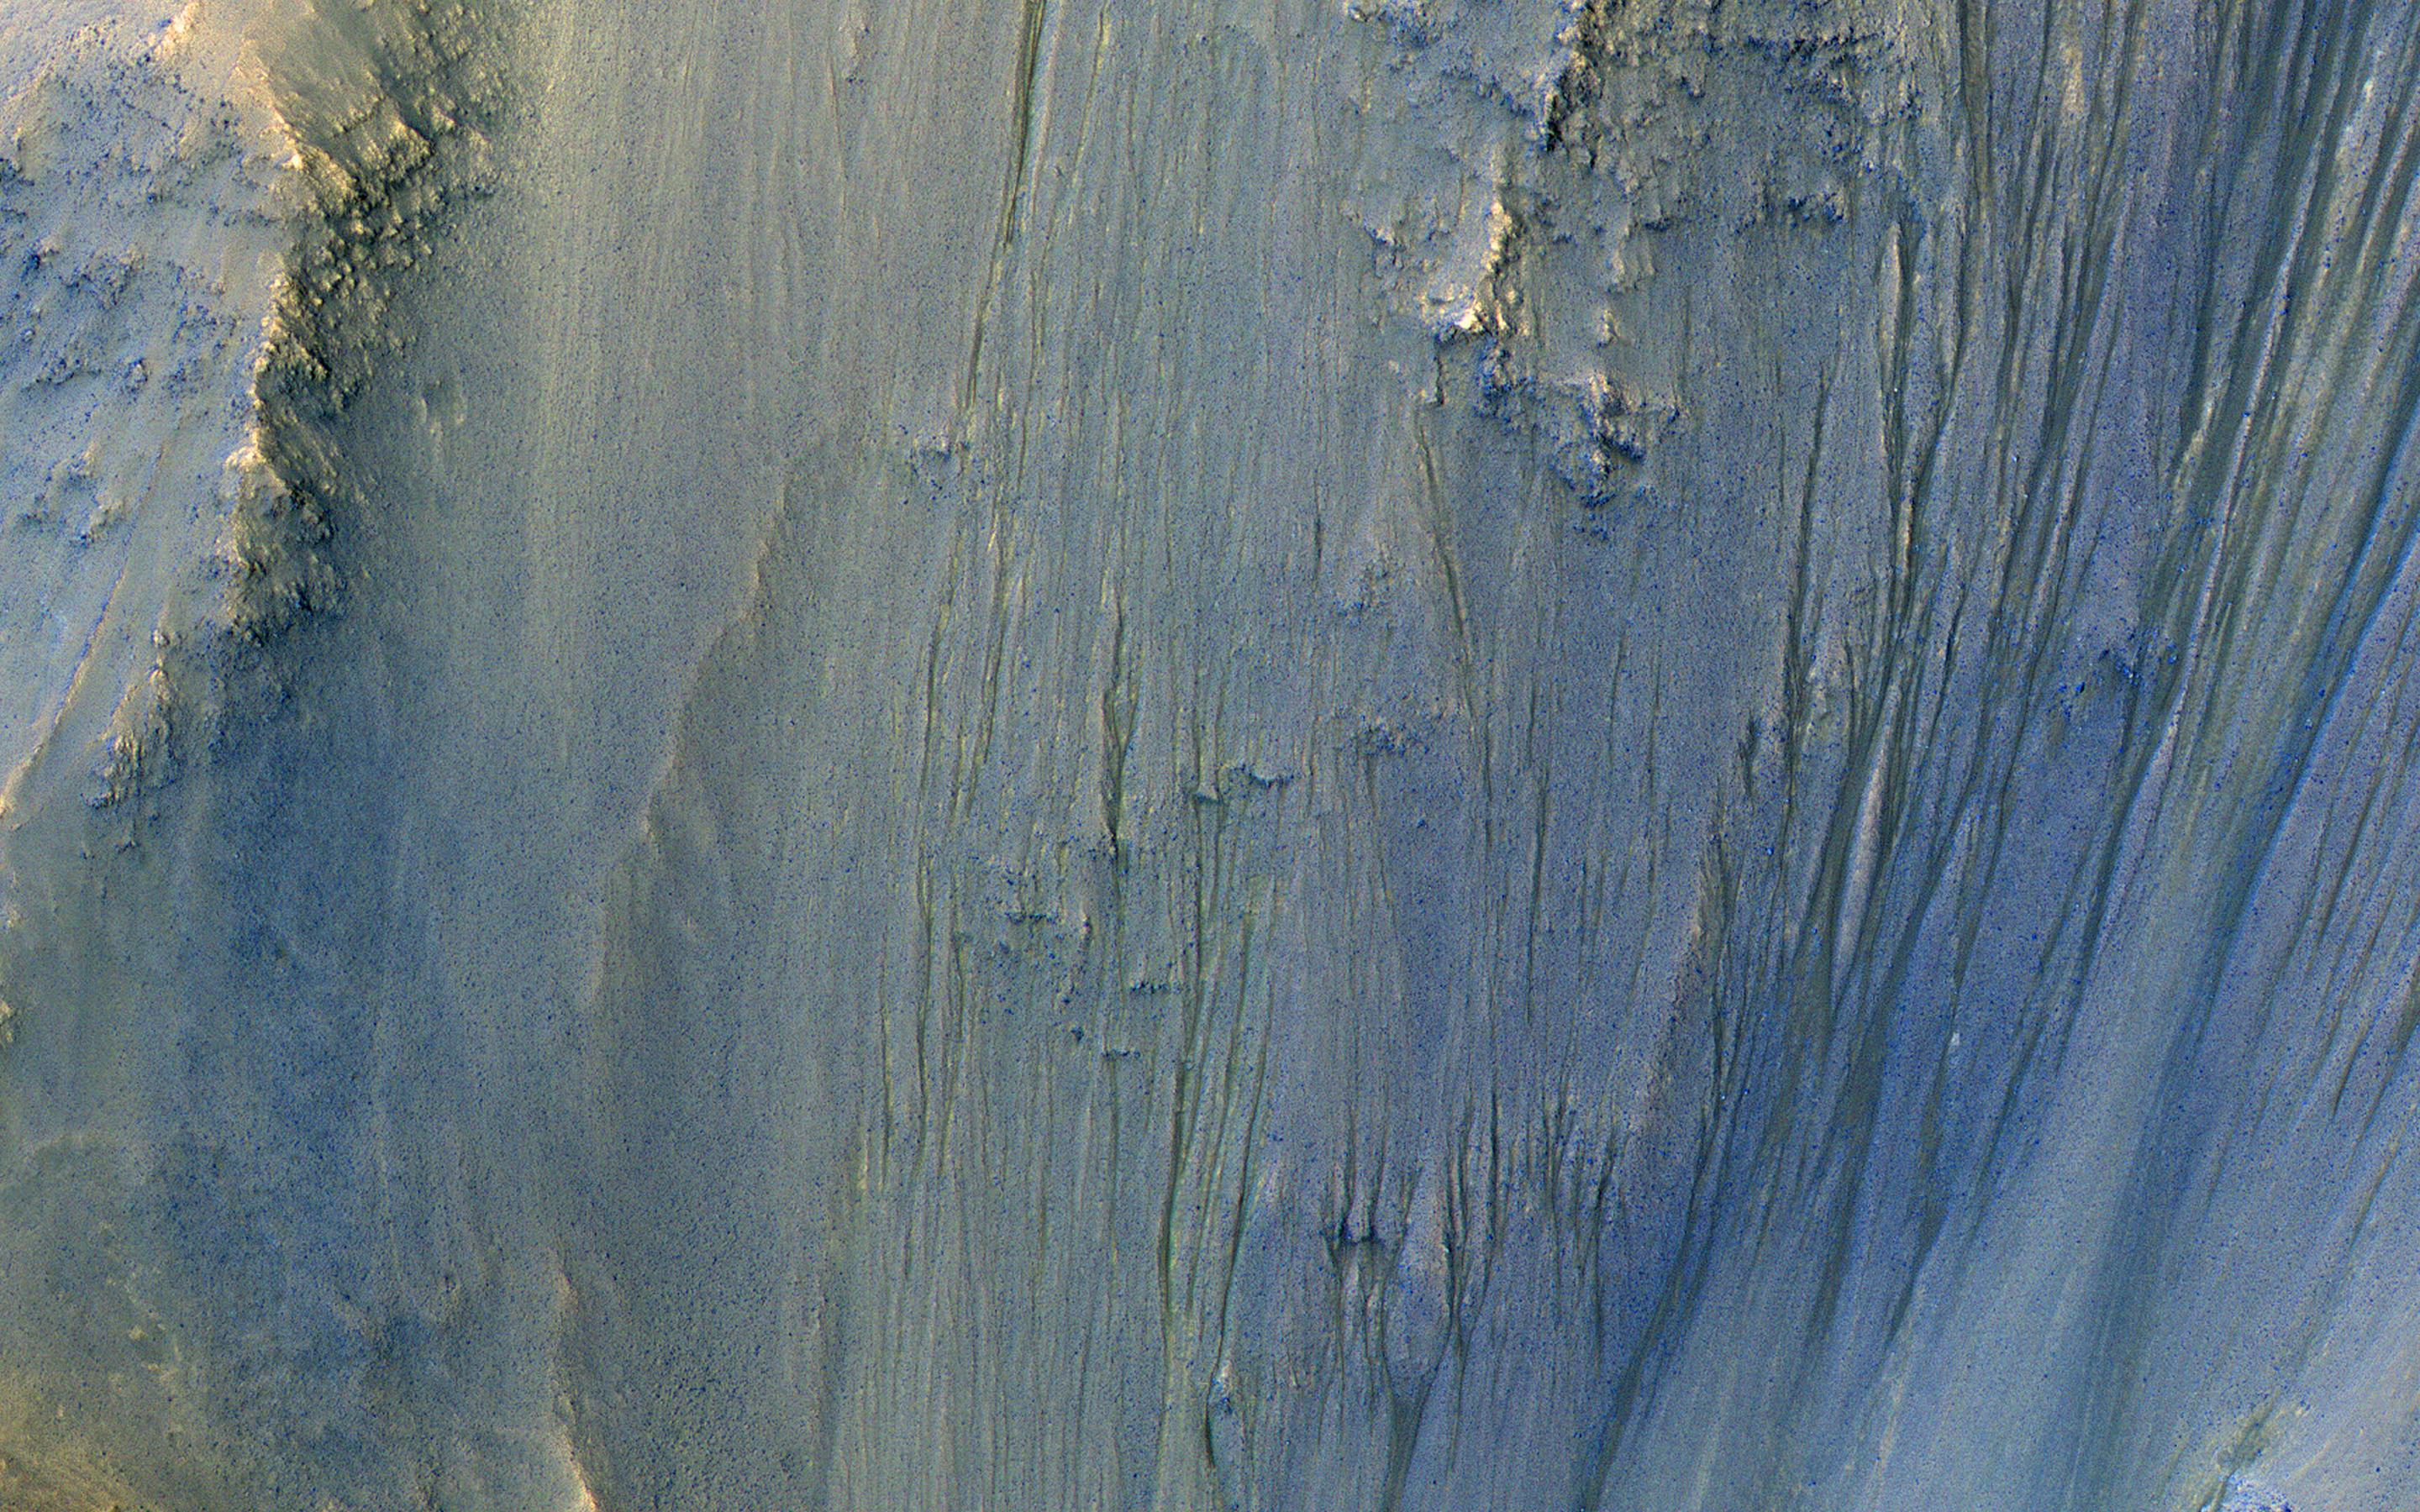 This image acquired on January 25, 2019 by NASAs Mars Reconnaissance Orbiter, shows Ius Chasma, a major section of the western portion of the giant Valles Marineris trough.